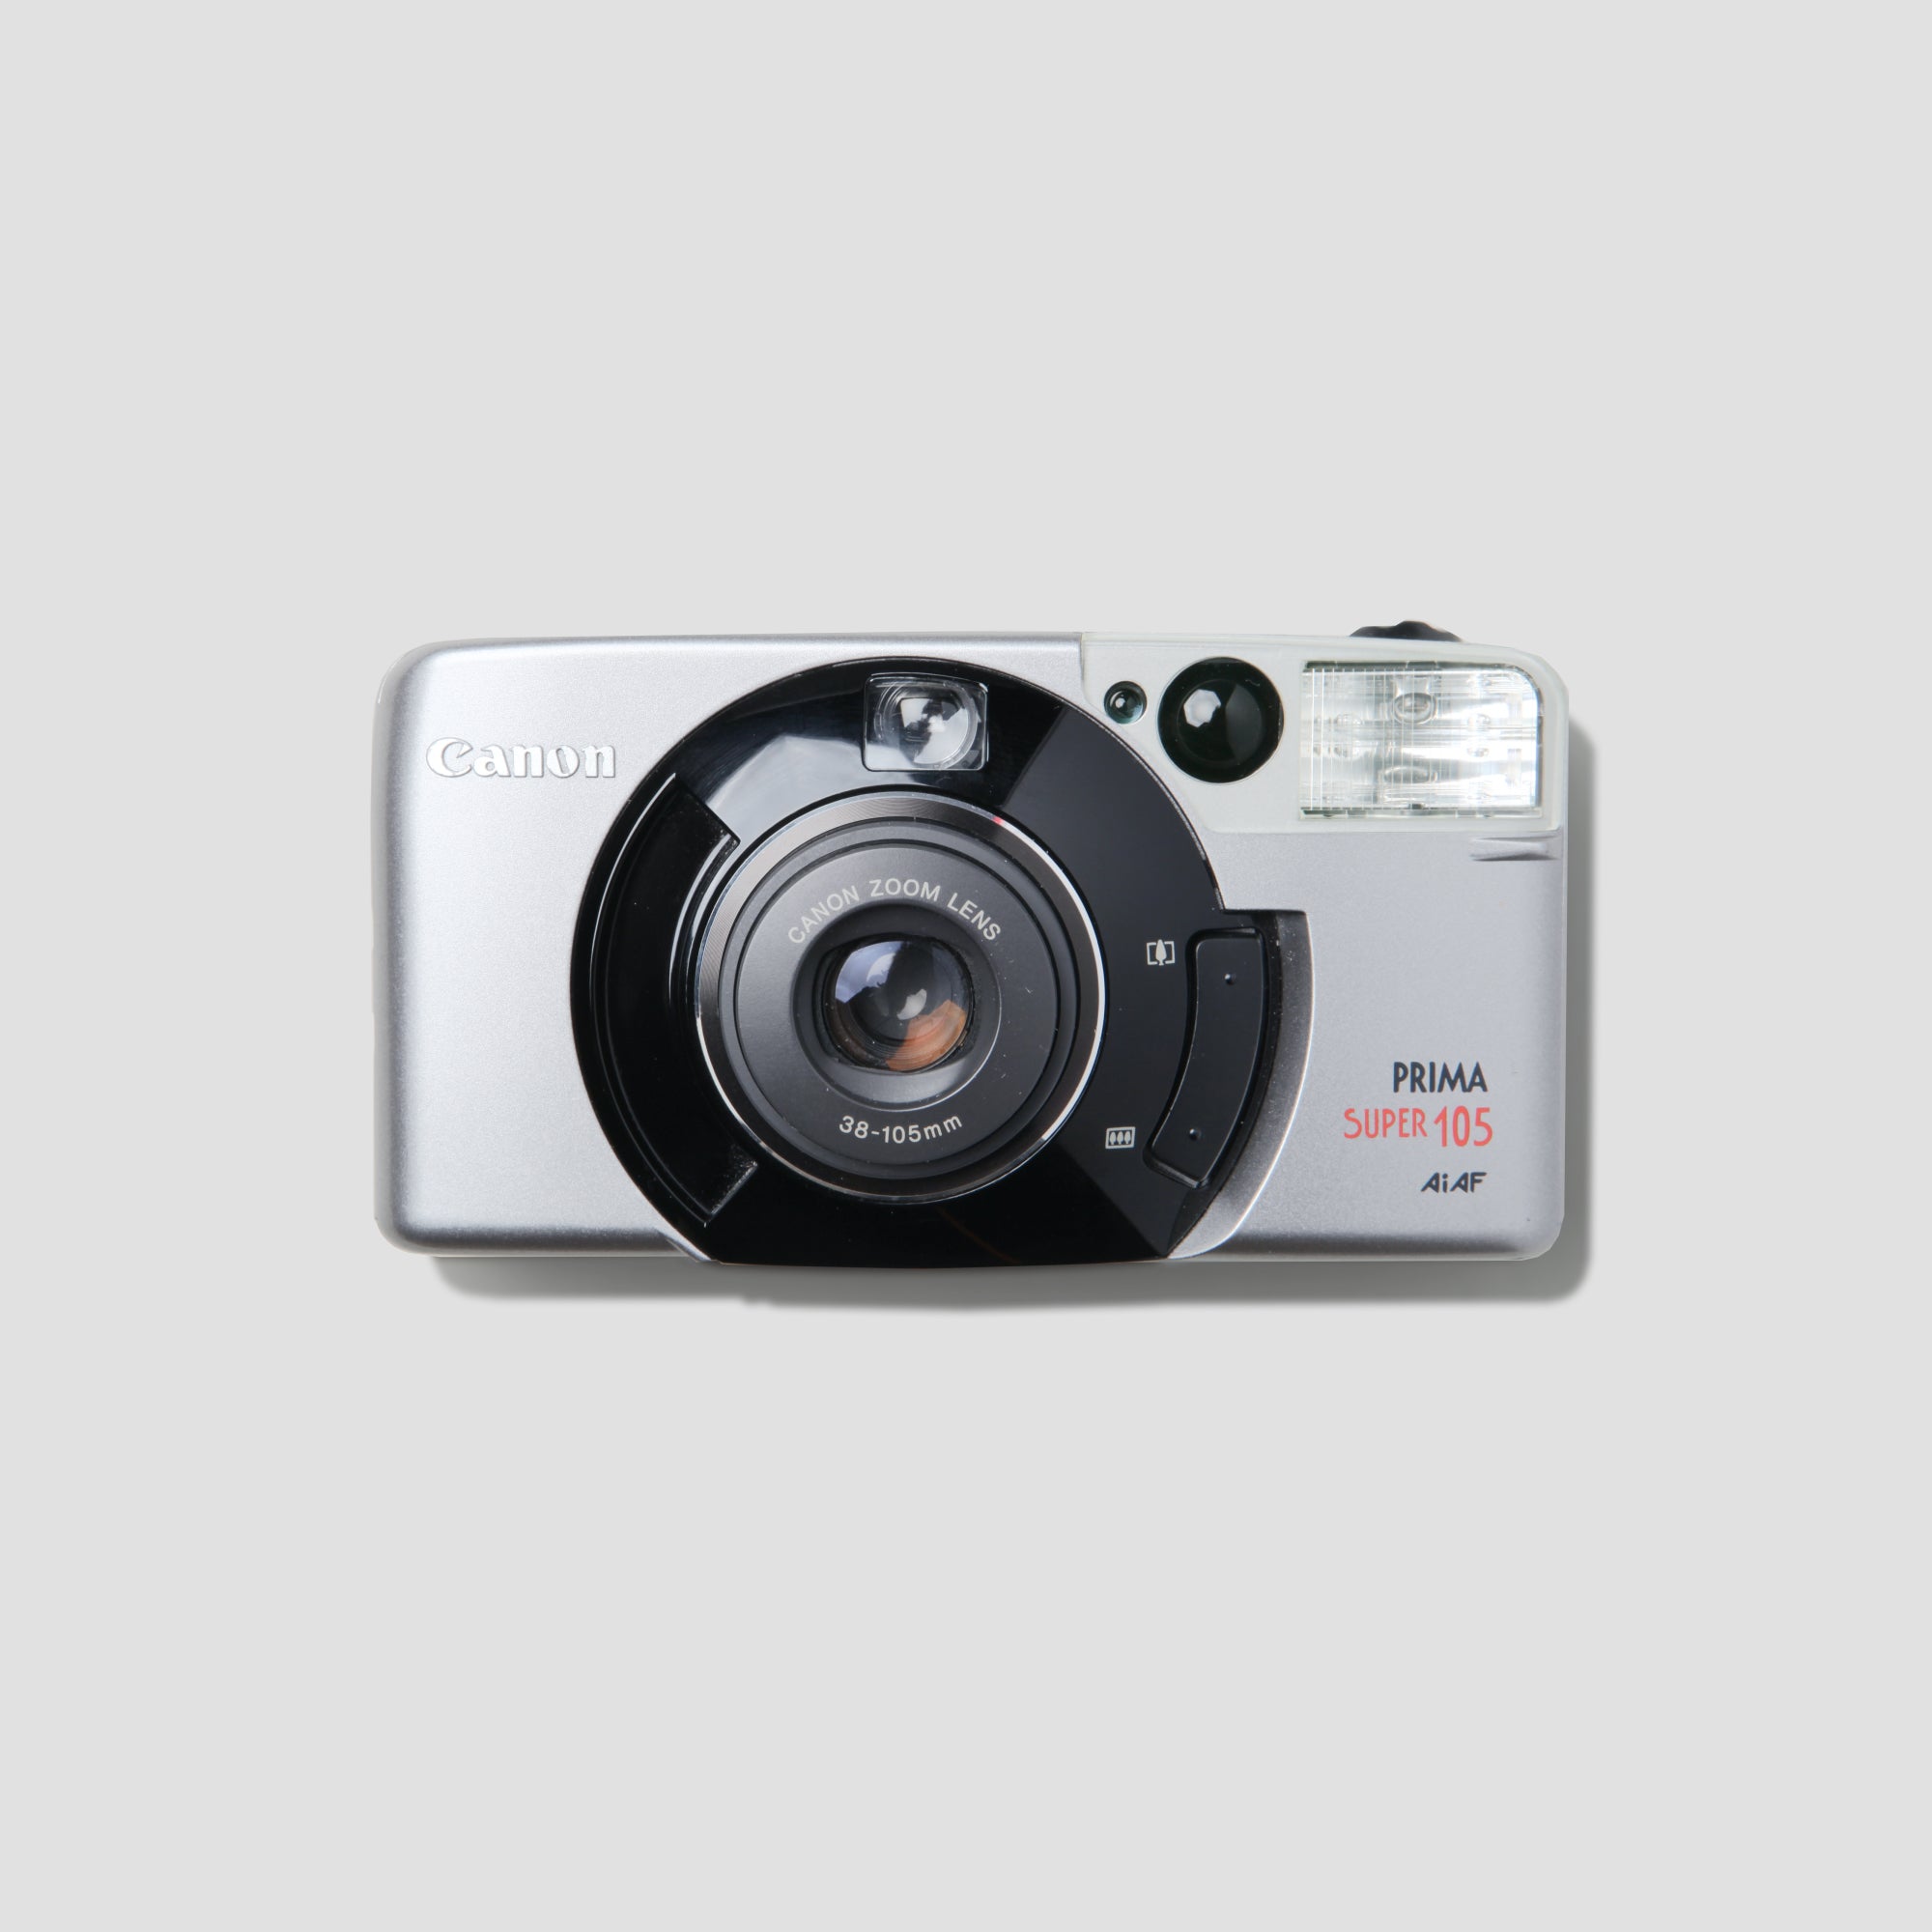 Buy Canon Prima Super 105 now at Analogue Amsterdam